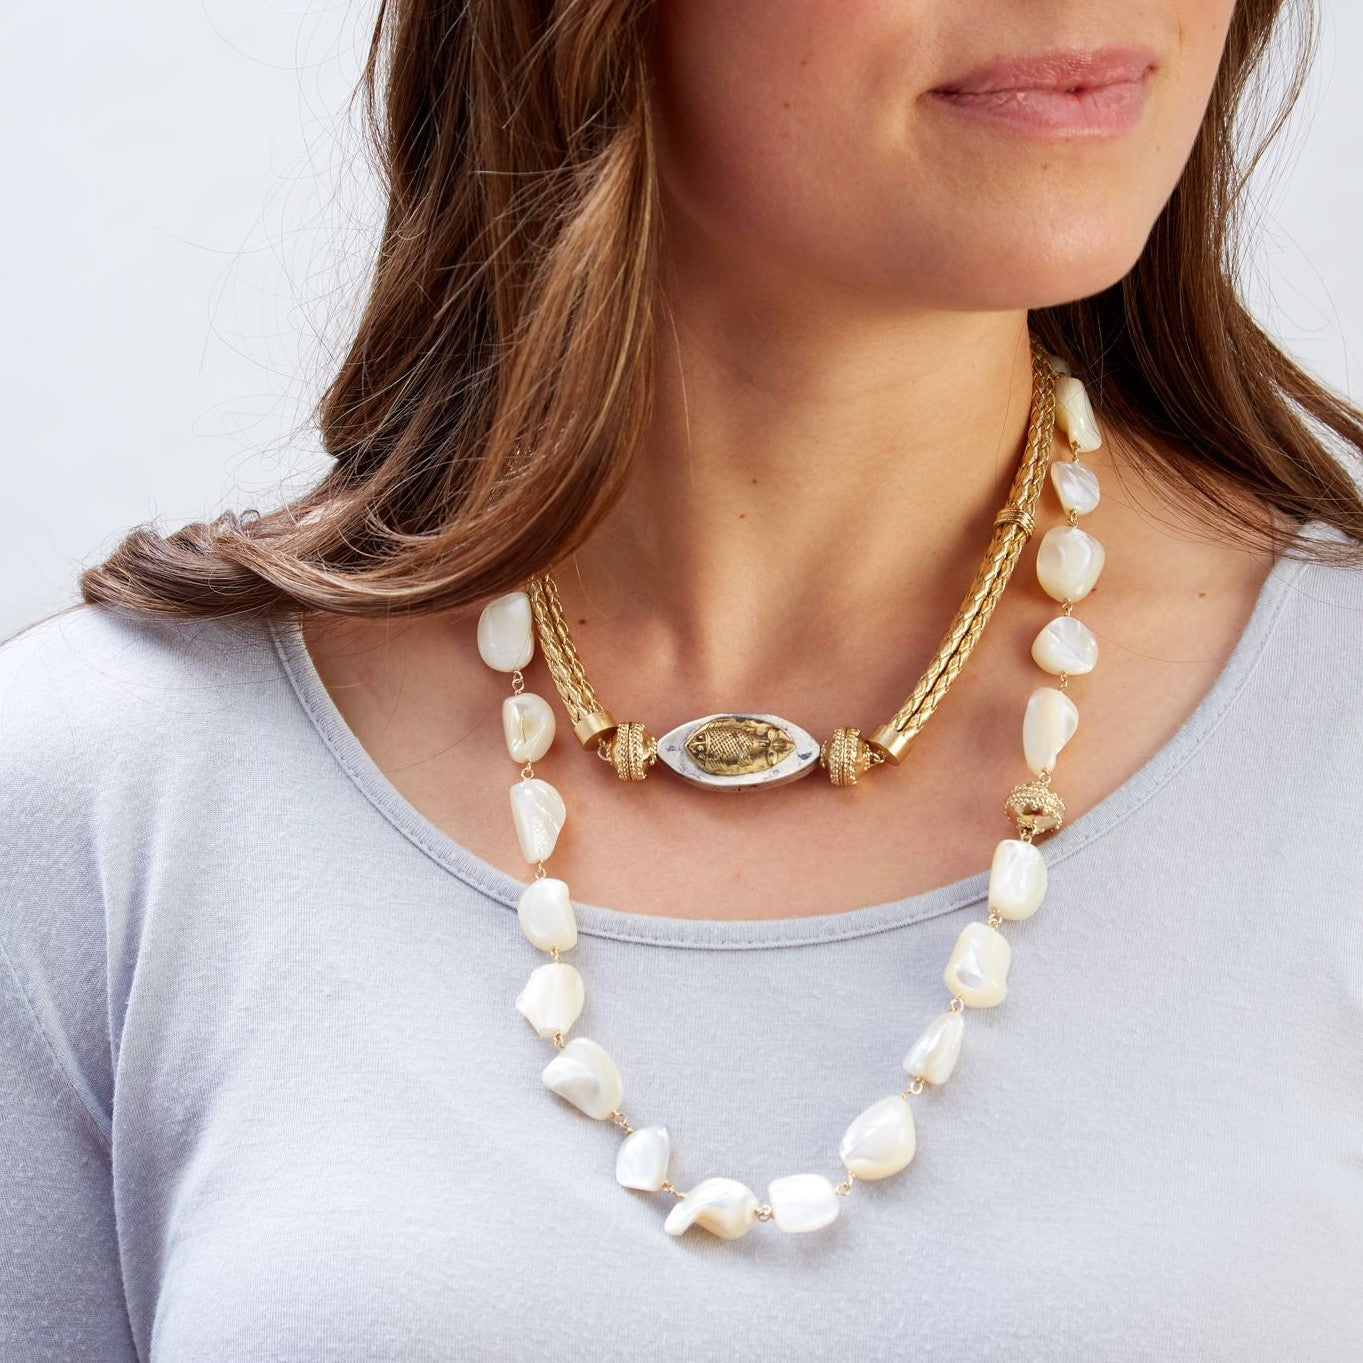 Caspian Mother of Pearl Necklace